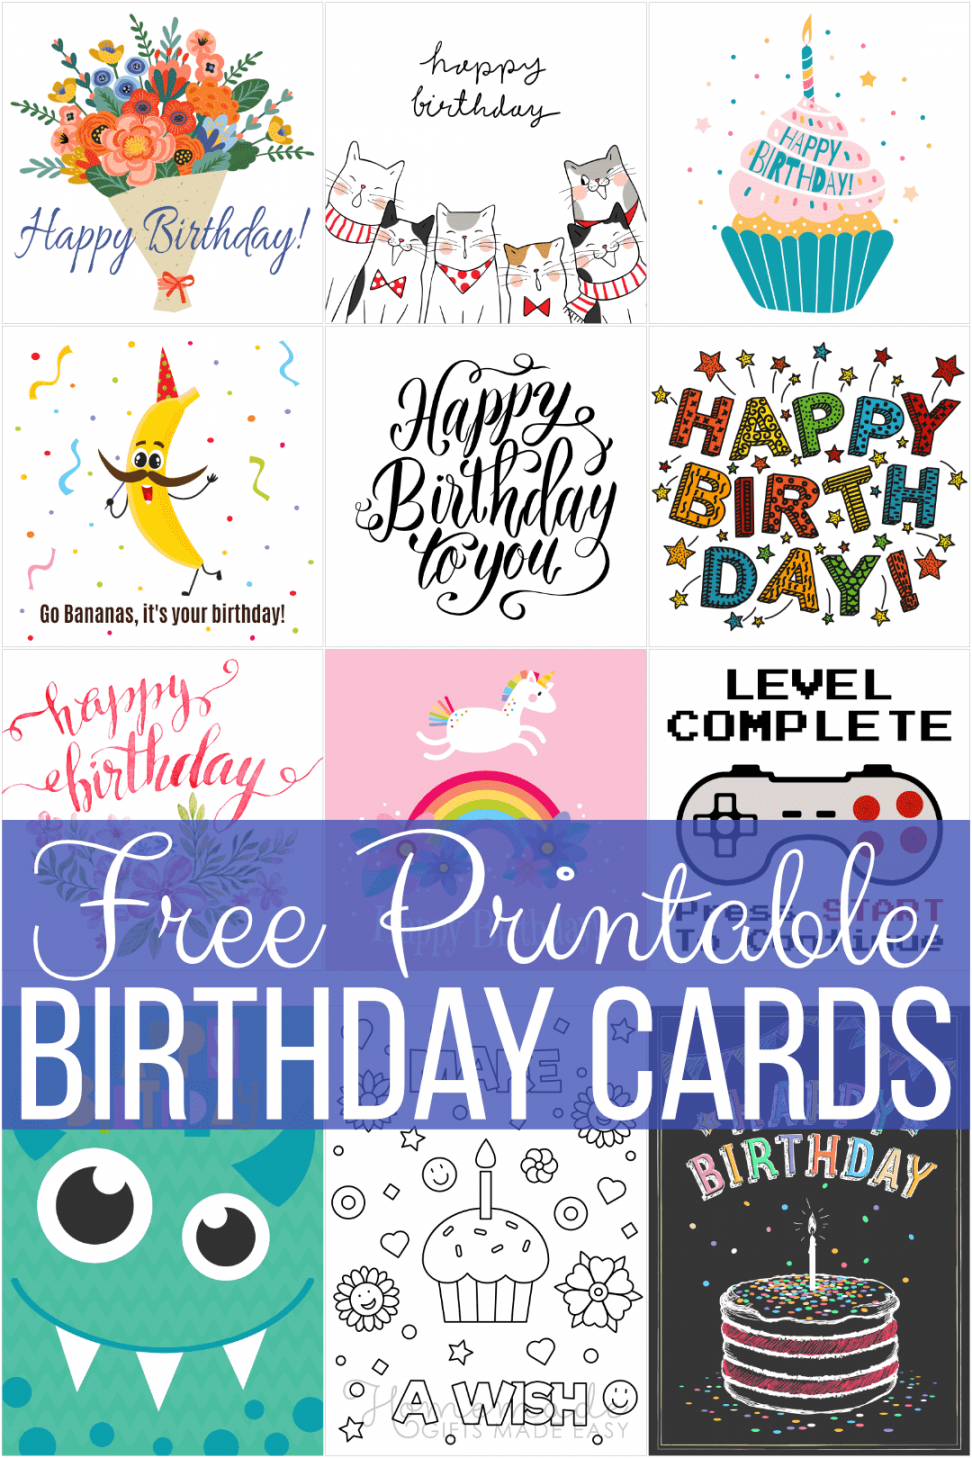 Free Printable Birthday Cards For Adults - Printable - Free Printable Birthday Cards for Everyone